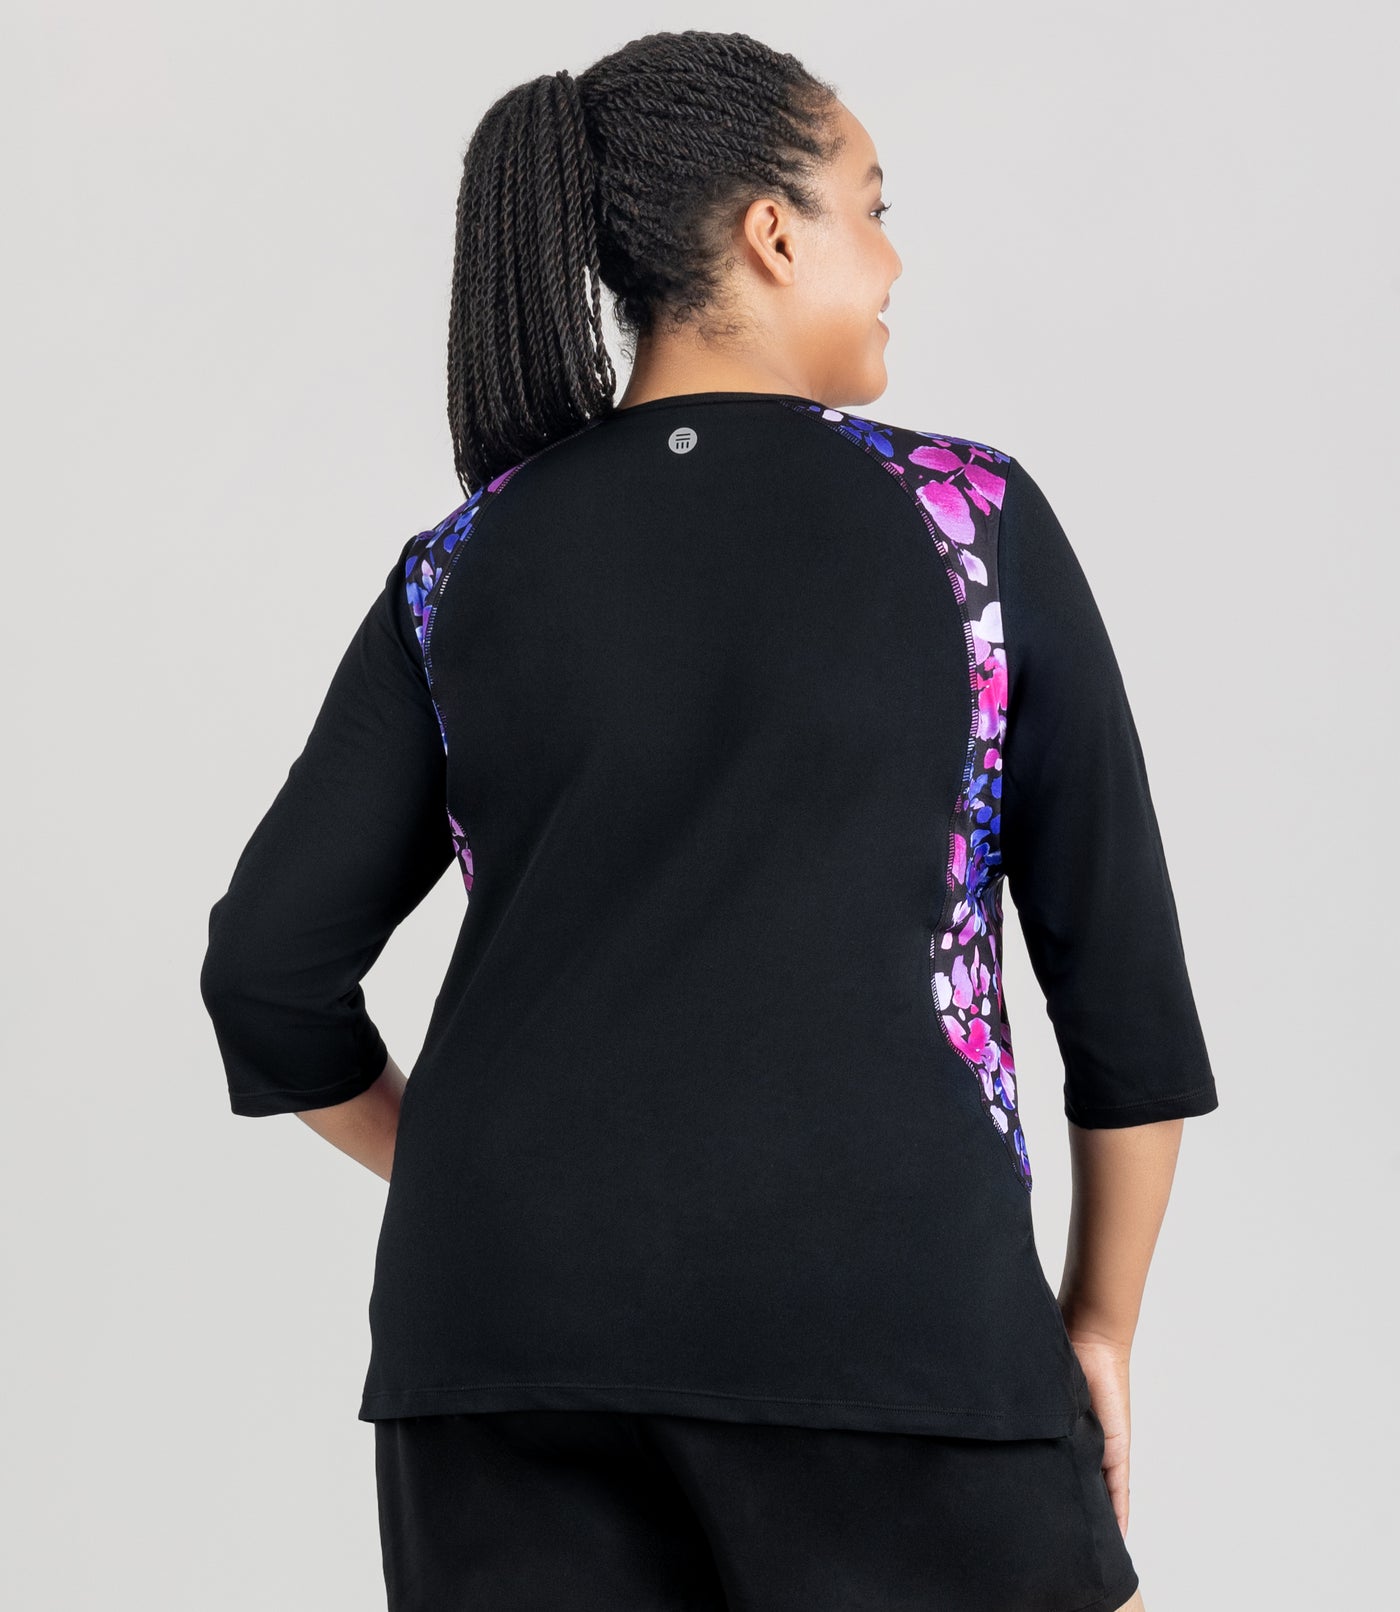 JunoActive model, facing back, wearing Aquasport three quarter sleeve rash guard in blue and pink floral elegance print. Hands are by her side.